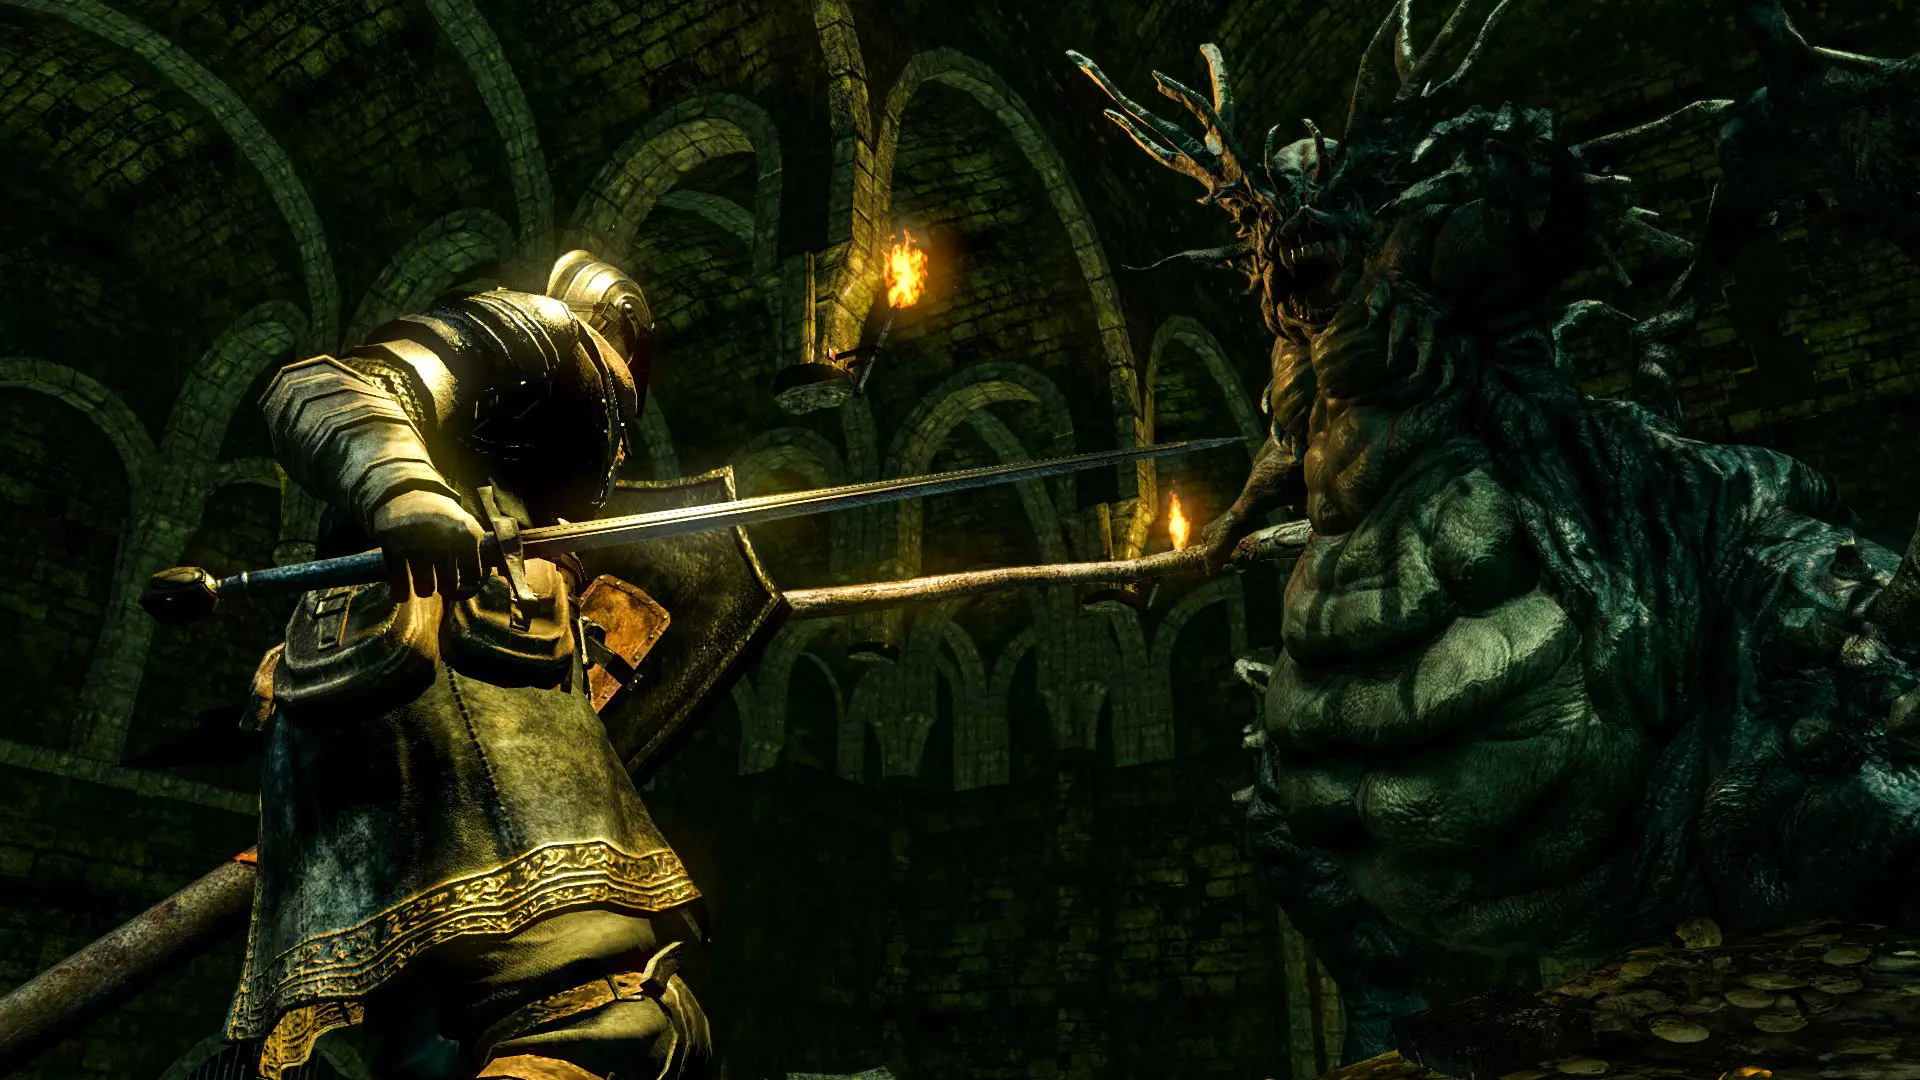 Adding difficulty options to a game like 'Dark Souls' would allow more people to enjoy it, without compromising its makers' intents /